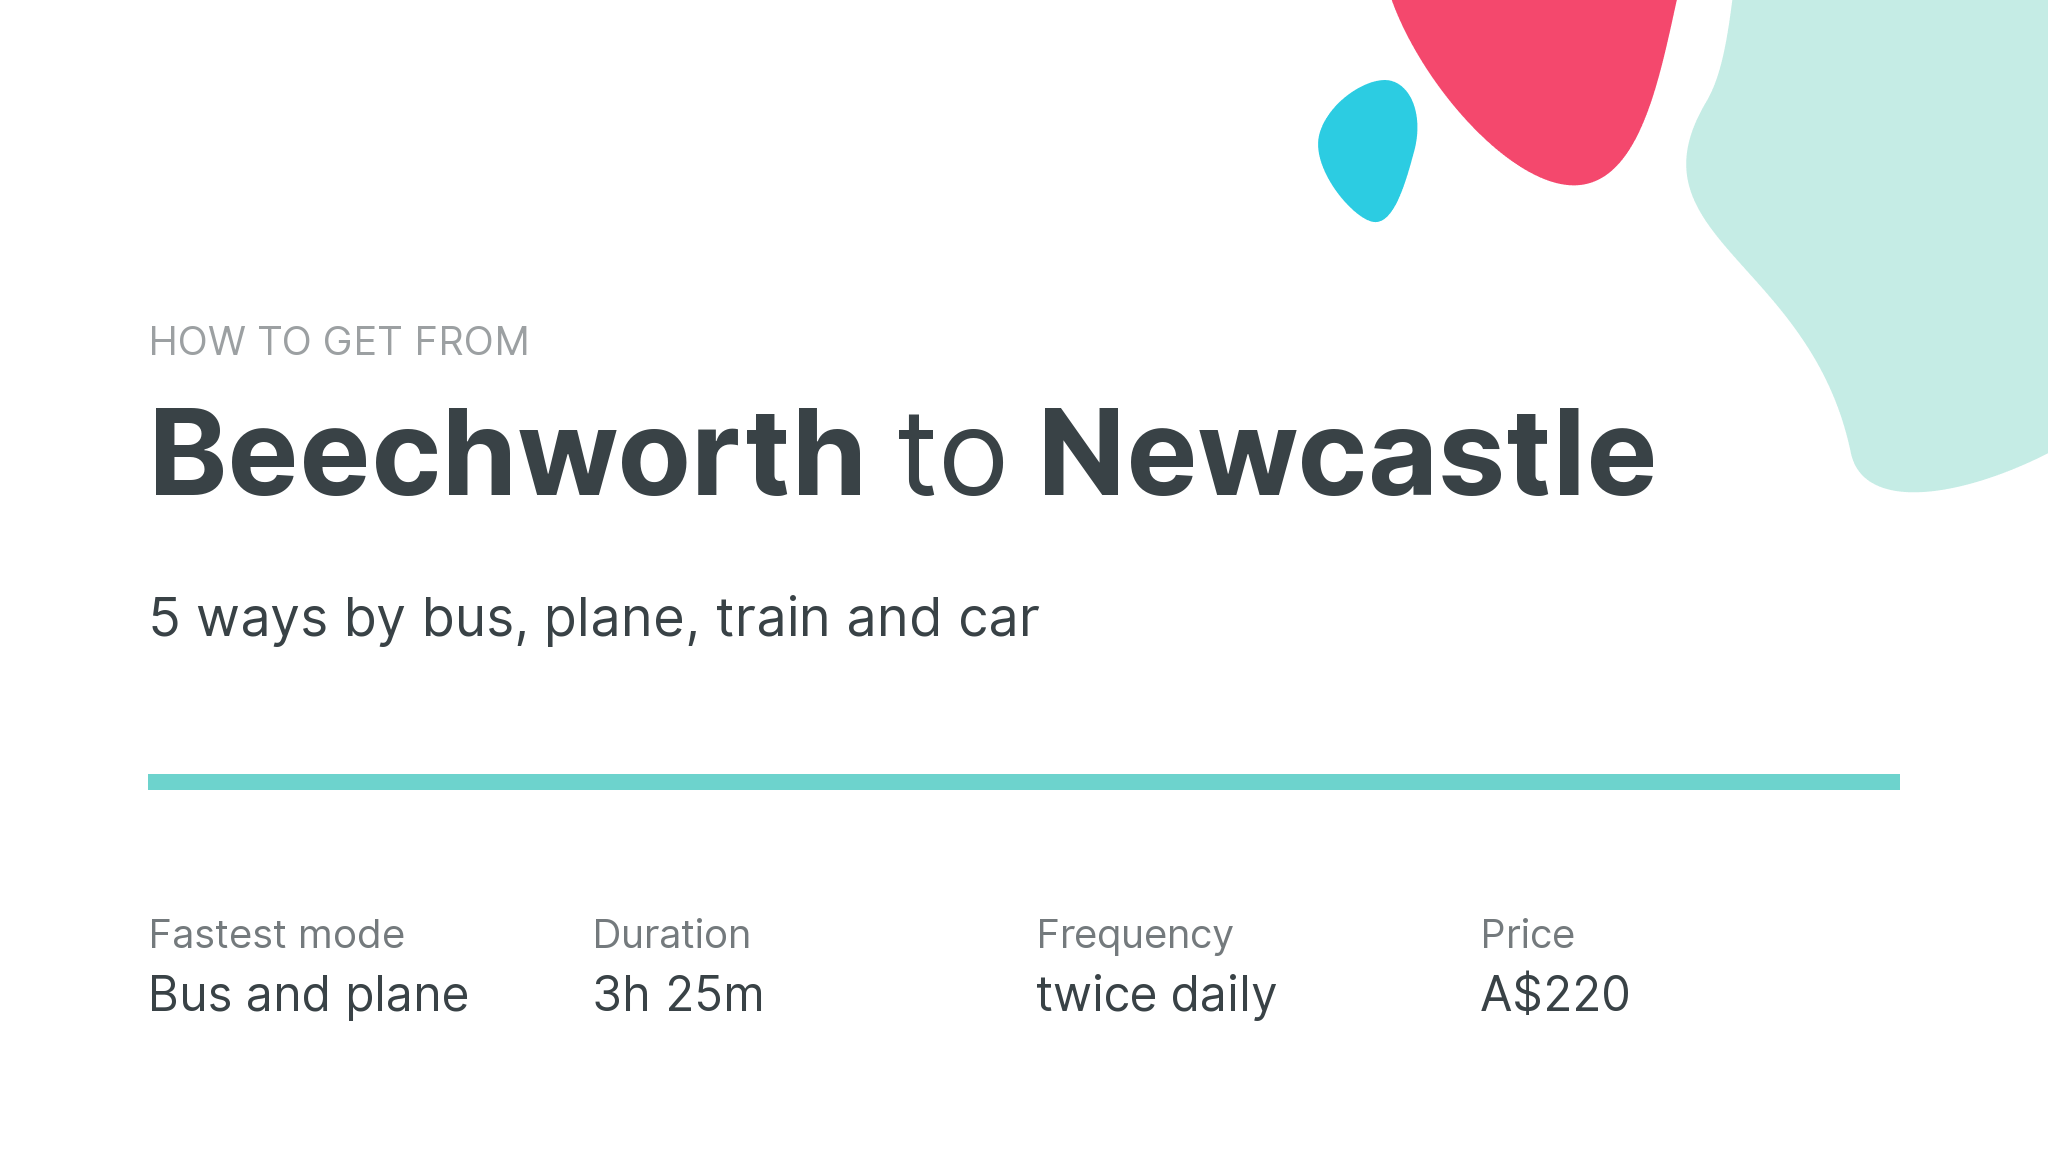 How do I get from Beechworth to Newcastle